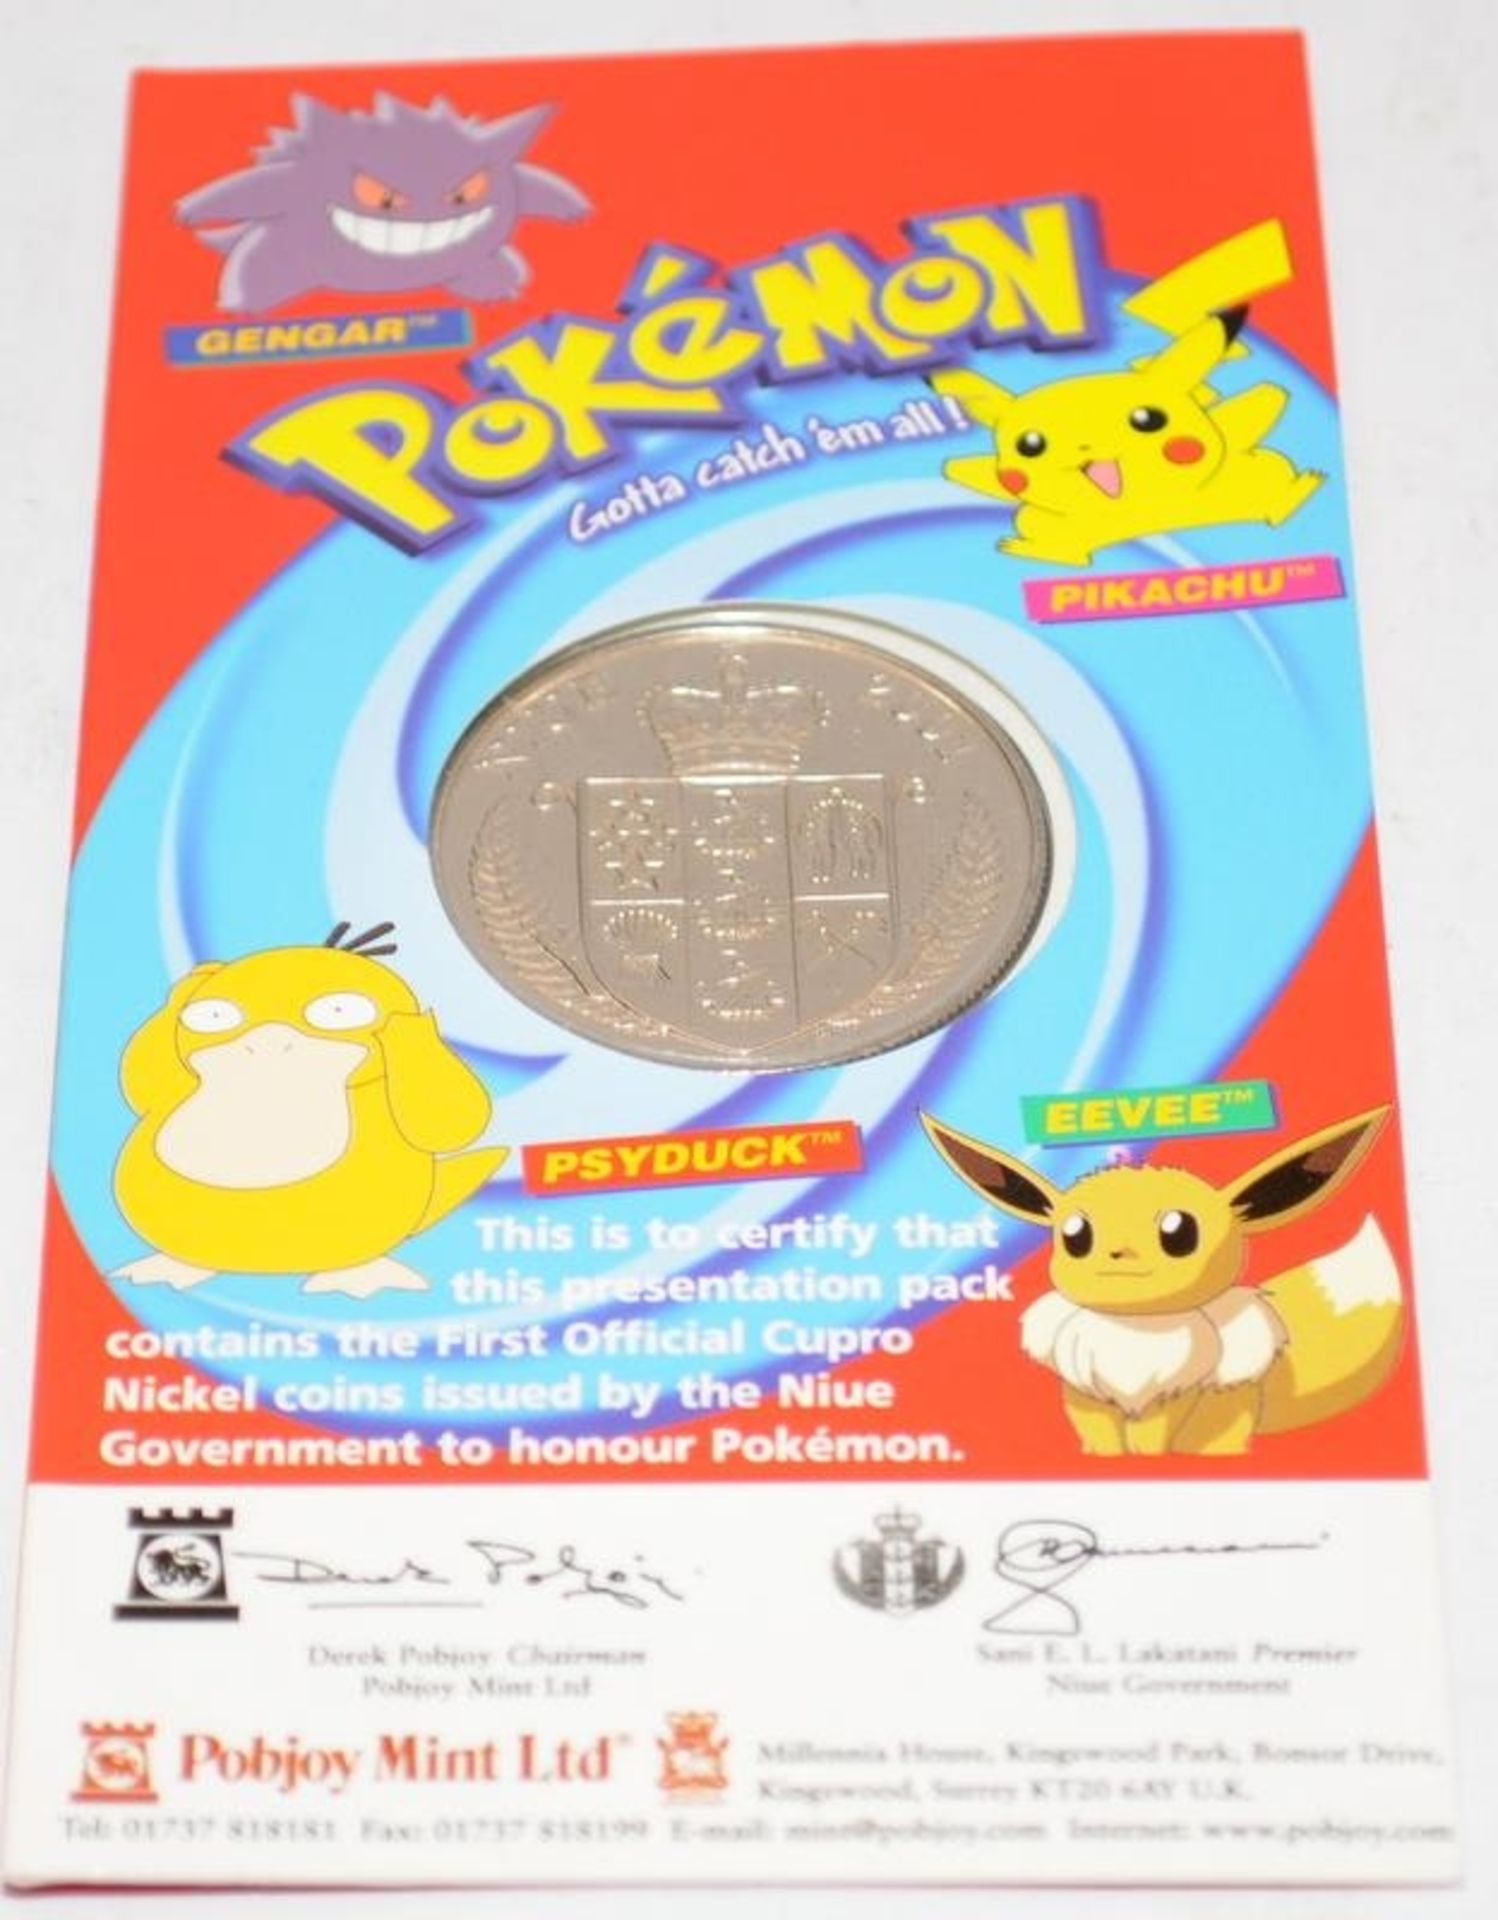 Rare Pobjoy Mint 2001 Nuie $1 Pokemon cupro nickel coin. Character Charmander, carded and sealed. - Image 2 of 2